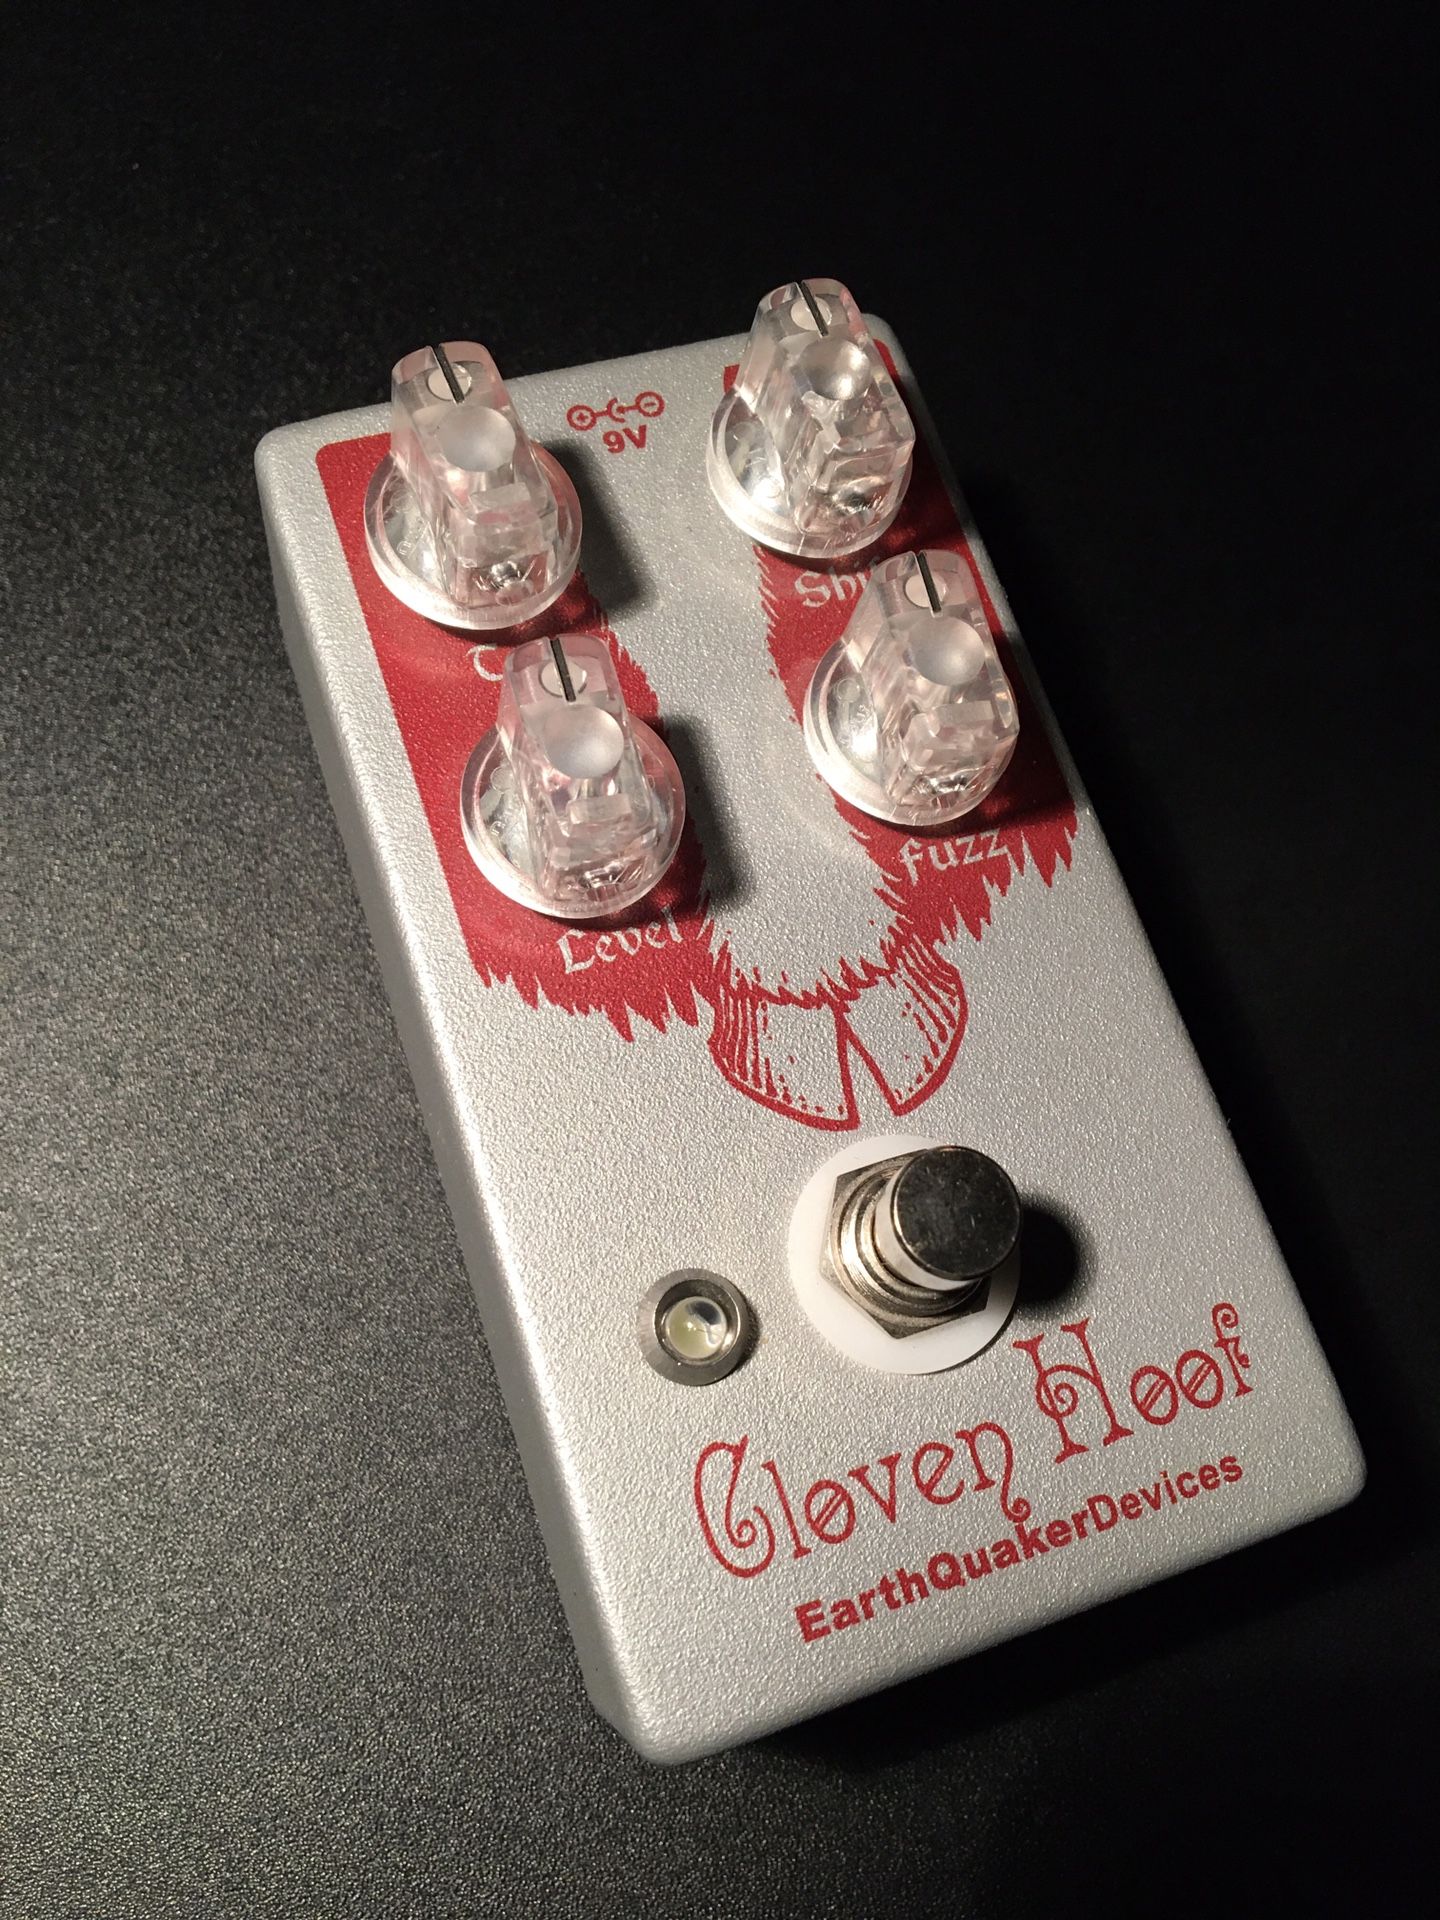 EarthQuaker Devices Cloven Hoof V2 Silicon Fuzz Pedal Pedal